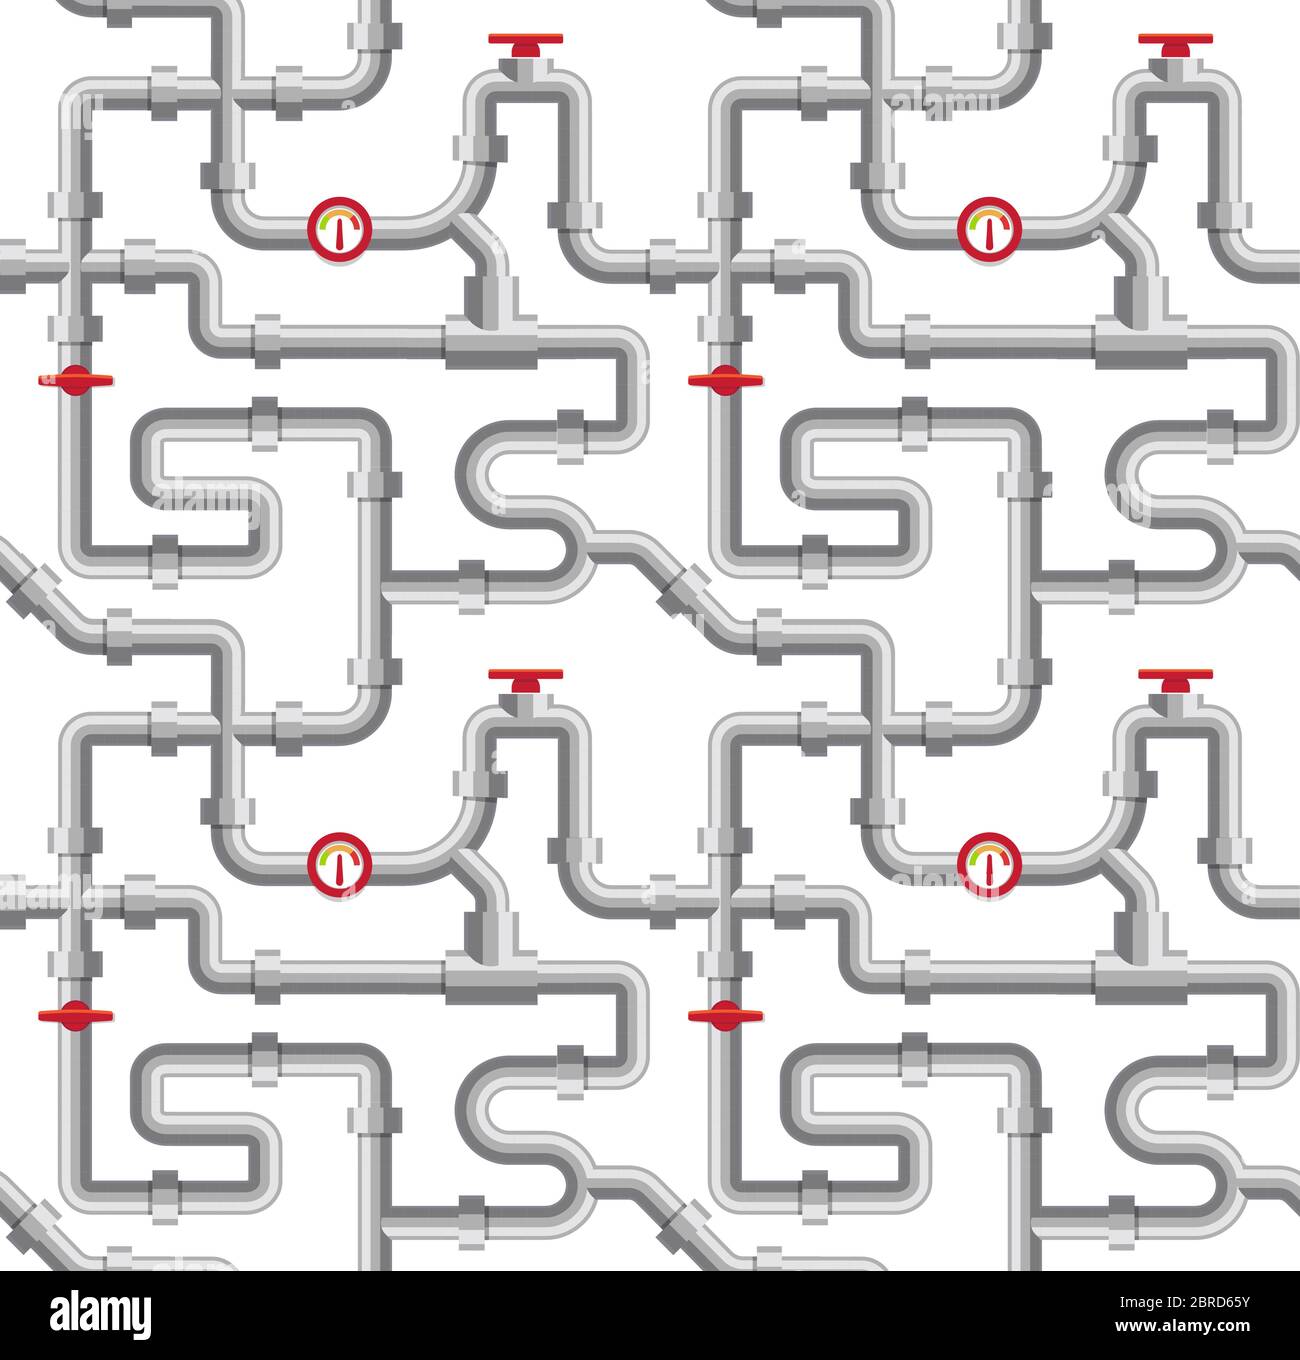 Water supply, pipelines project vector illustration. Plumbing, sanitary engineering, sewage and drainage system Stock Vector